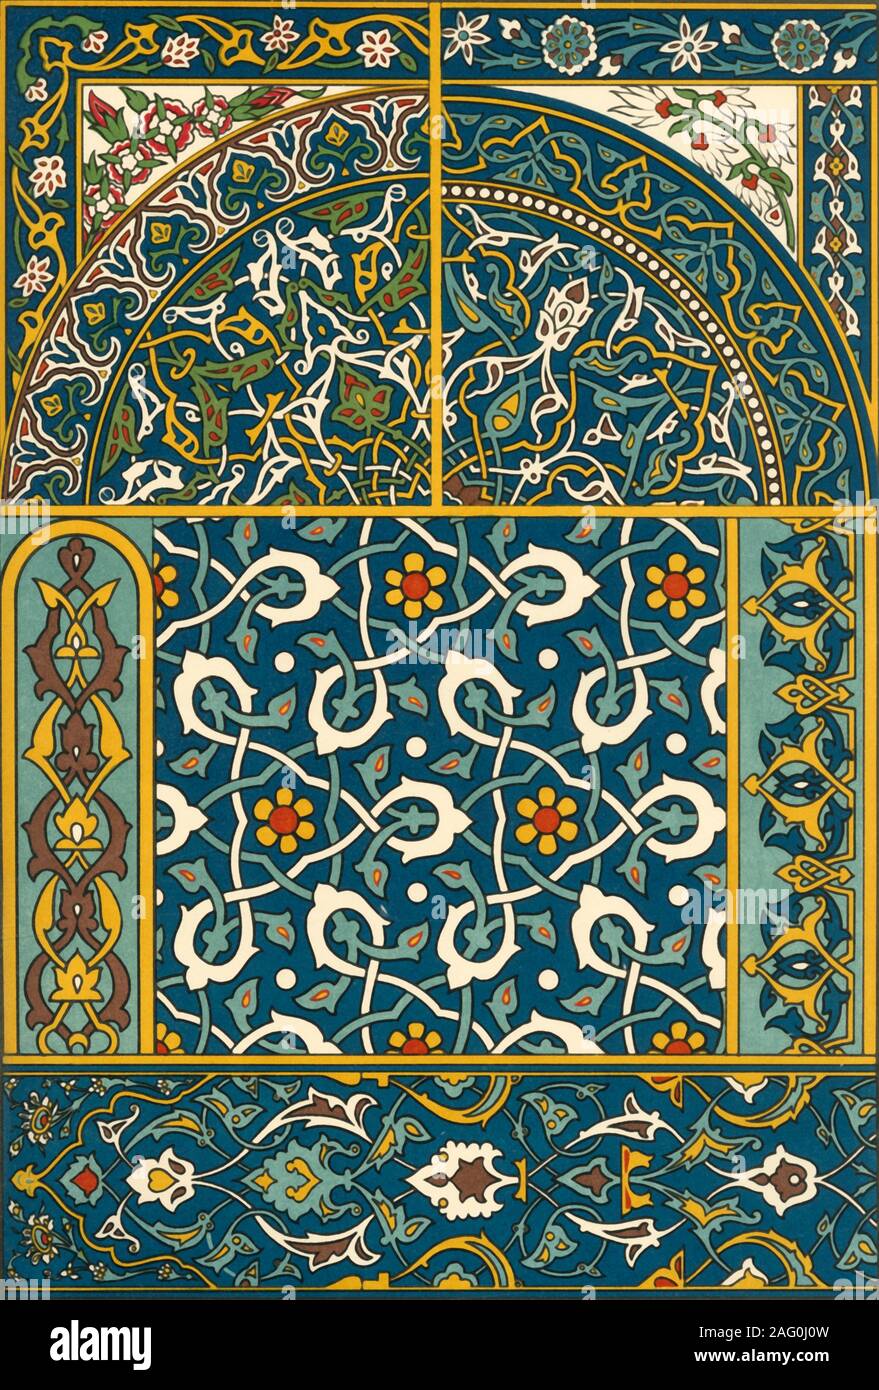 Turkish glazed ceramic designs, (1898). 'Architectural Ornament in Fa&#xef;ence - Figs 1,2 5, 6, 7 and 9: From the Mosque of Y&#xe9;chil-Djami at Brussa [The Green Mosque, also known as the Mosque of Sultan Mehmed I, Bursa, Turkey]. Figs 3, 4 and 8: From the Y&#xe9;chil-Turbey-Tomb of Sultan Mohammed I [The Green Tomb or Yesil T&#xfc;rbe, the mausoleum of Mehmed I, Bursa]. Figs 10 and 11: From the Tomb Mourahdieh [The Muradiye Complex or the Complex of Sultan Murad II, Bursa]...in the ornament of the Islamitic nations, the Persian floral element always bursts forth afresh and in comparative pu Stock Photo